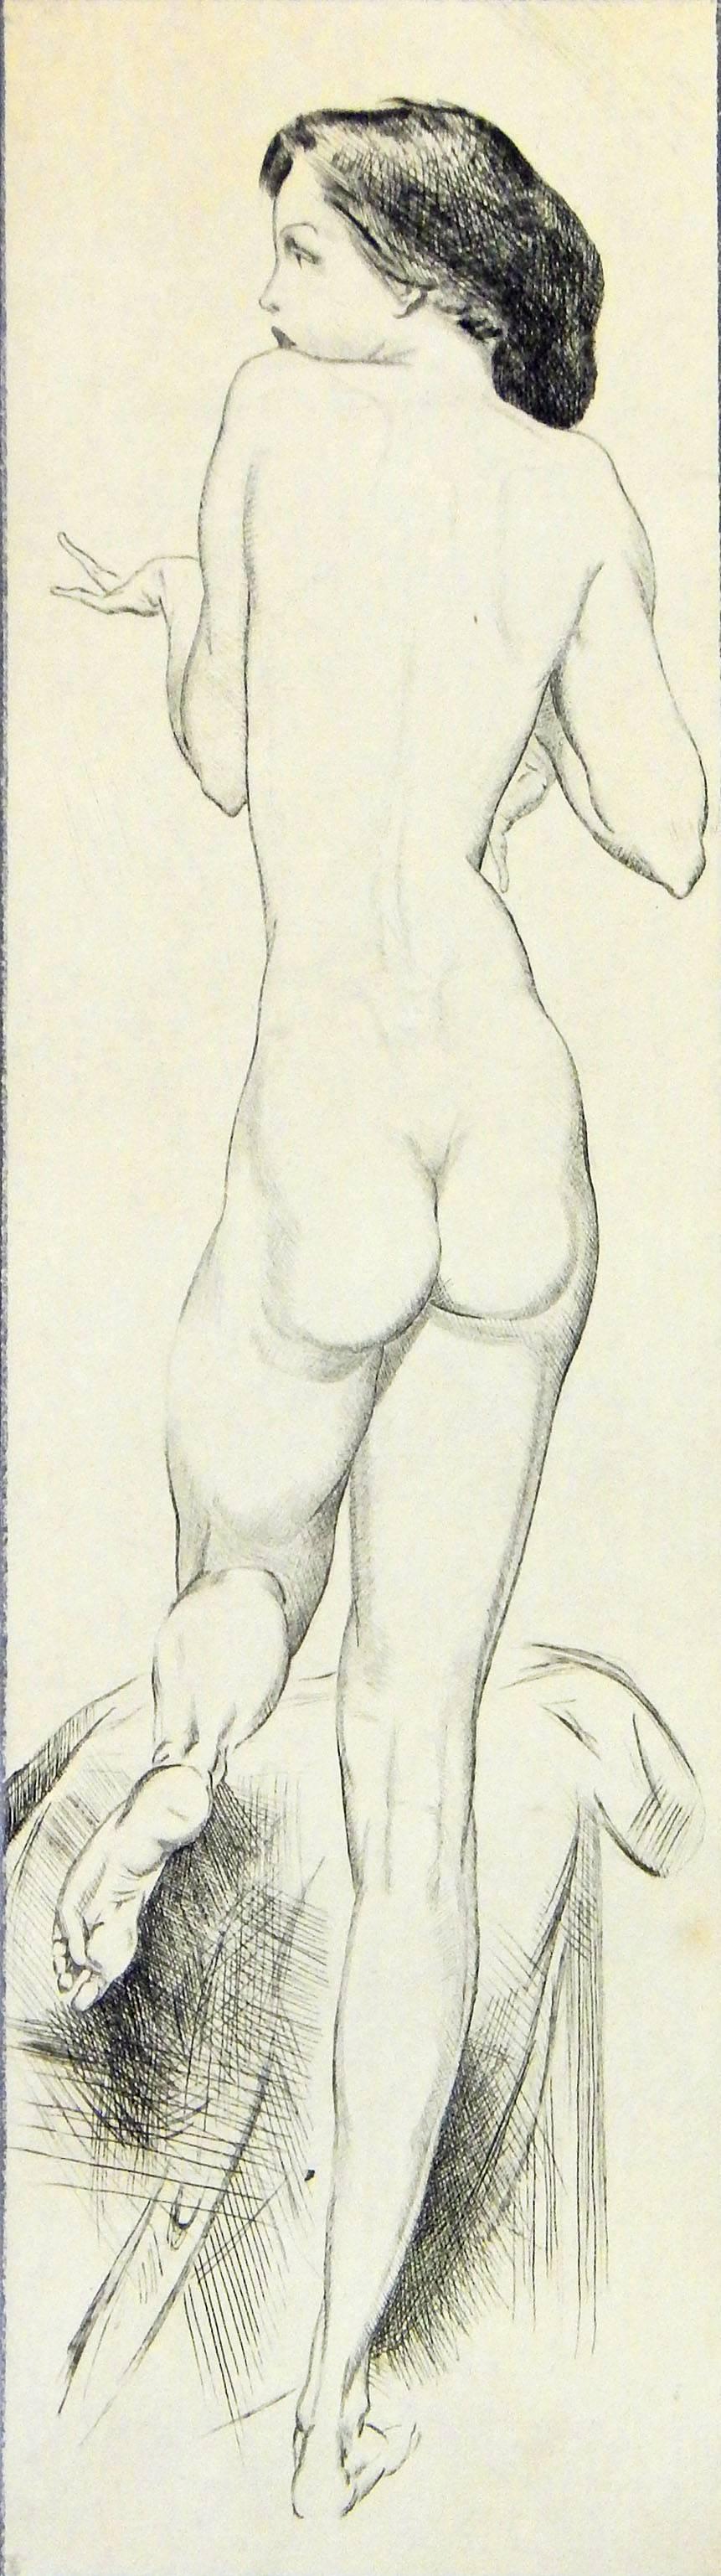 This sensuous drypoint etching by Donald De Lue of a female nude figure, almost Mannerist in its depiction of long, sinuous legs and arms, is a rare find. Created early in De Lue's career (1933-1934) when he worked in the New York studio of Bryant